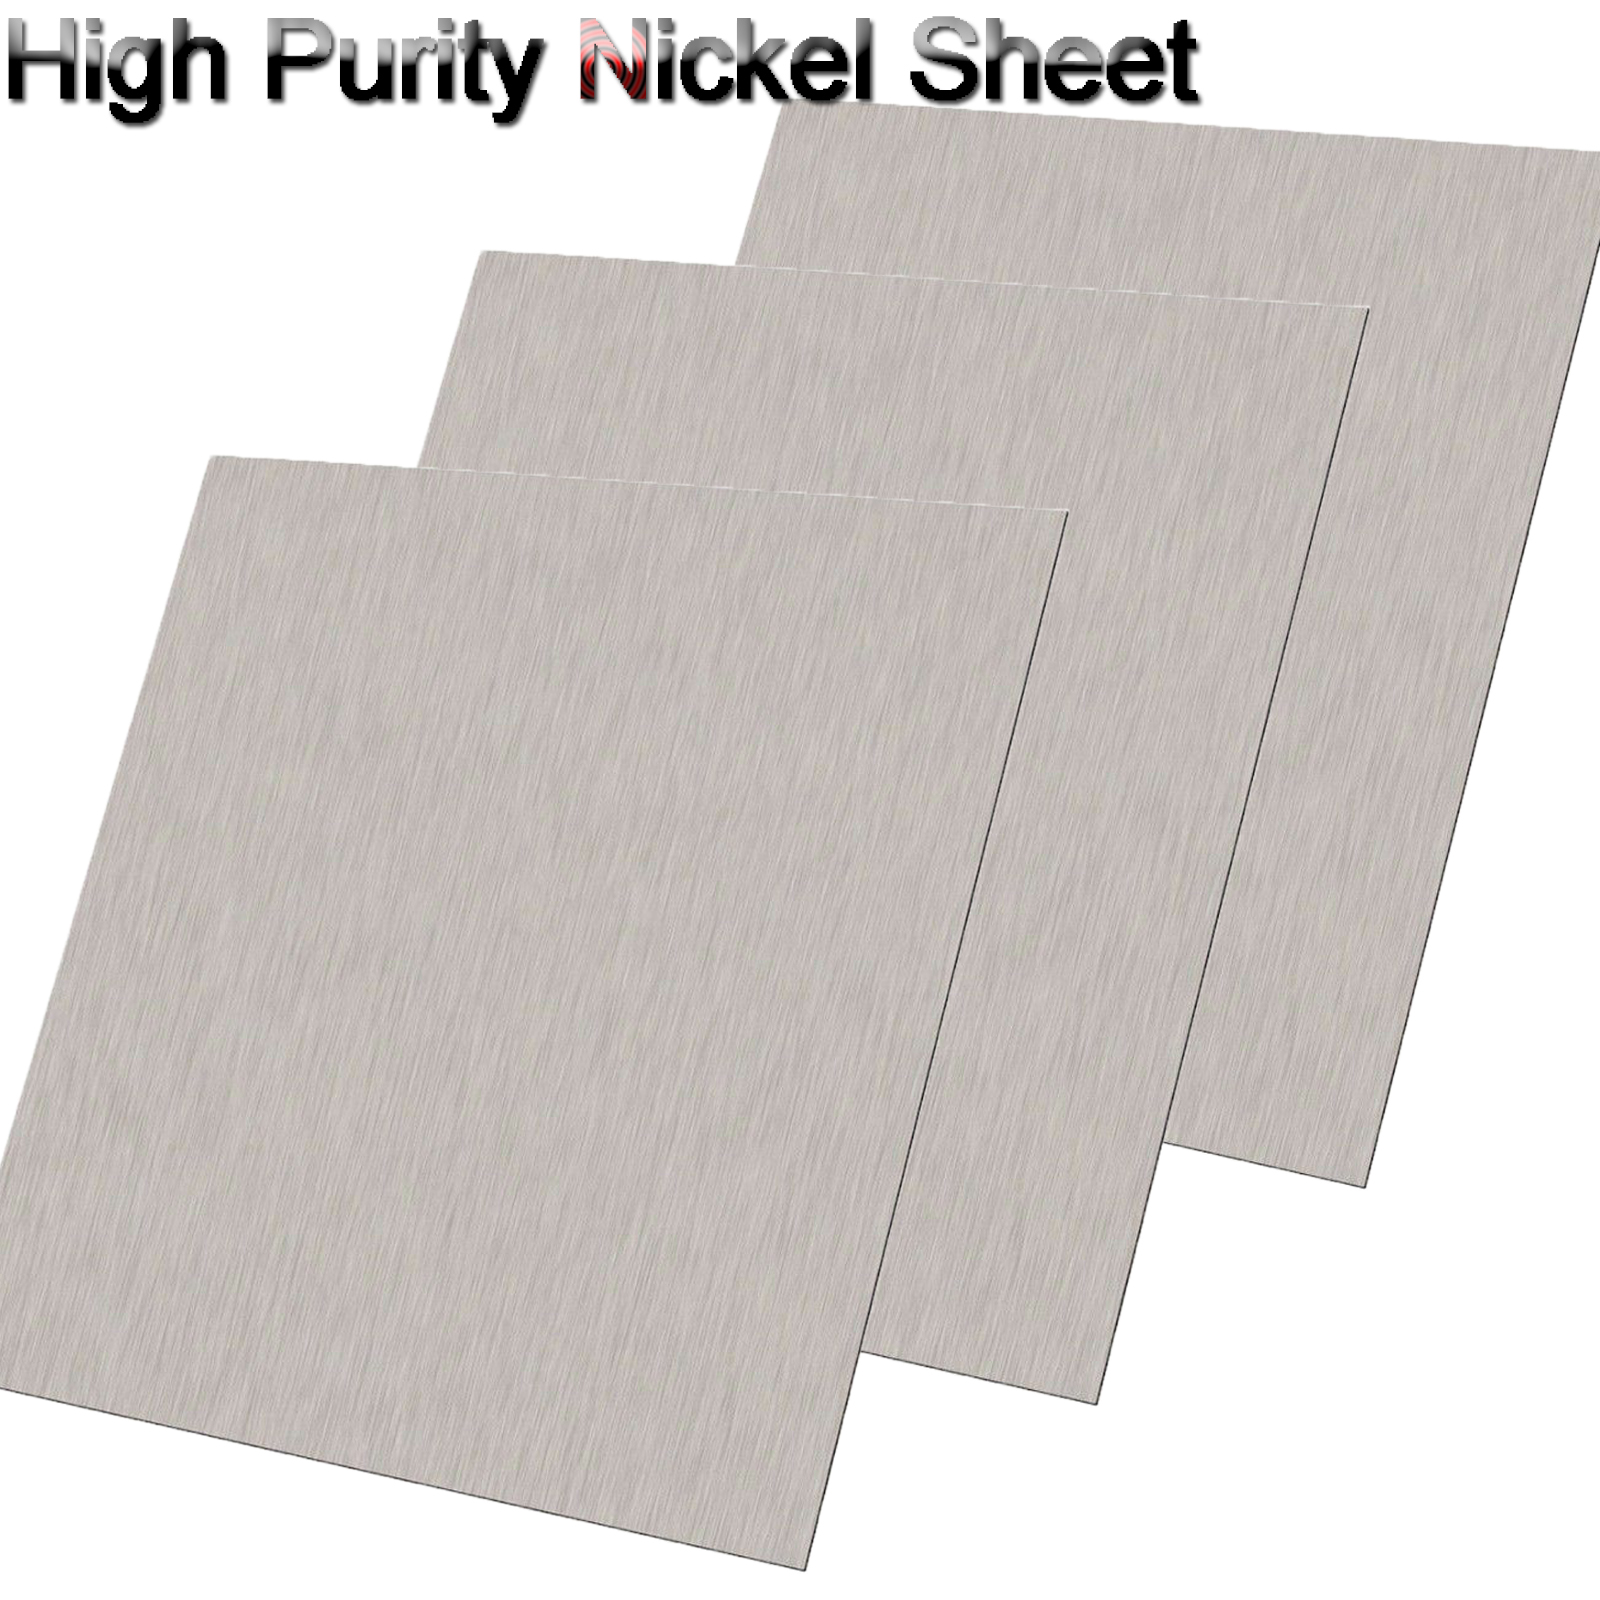 1-5mm thick High Purity Nickel Sheet Ni Foil Plate Electroplating Metal Industry